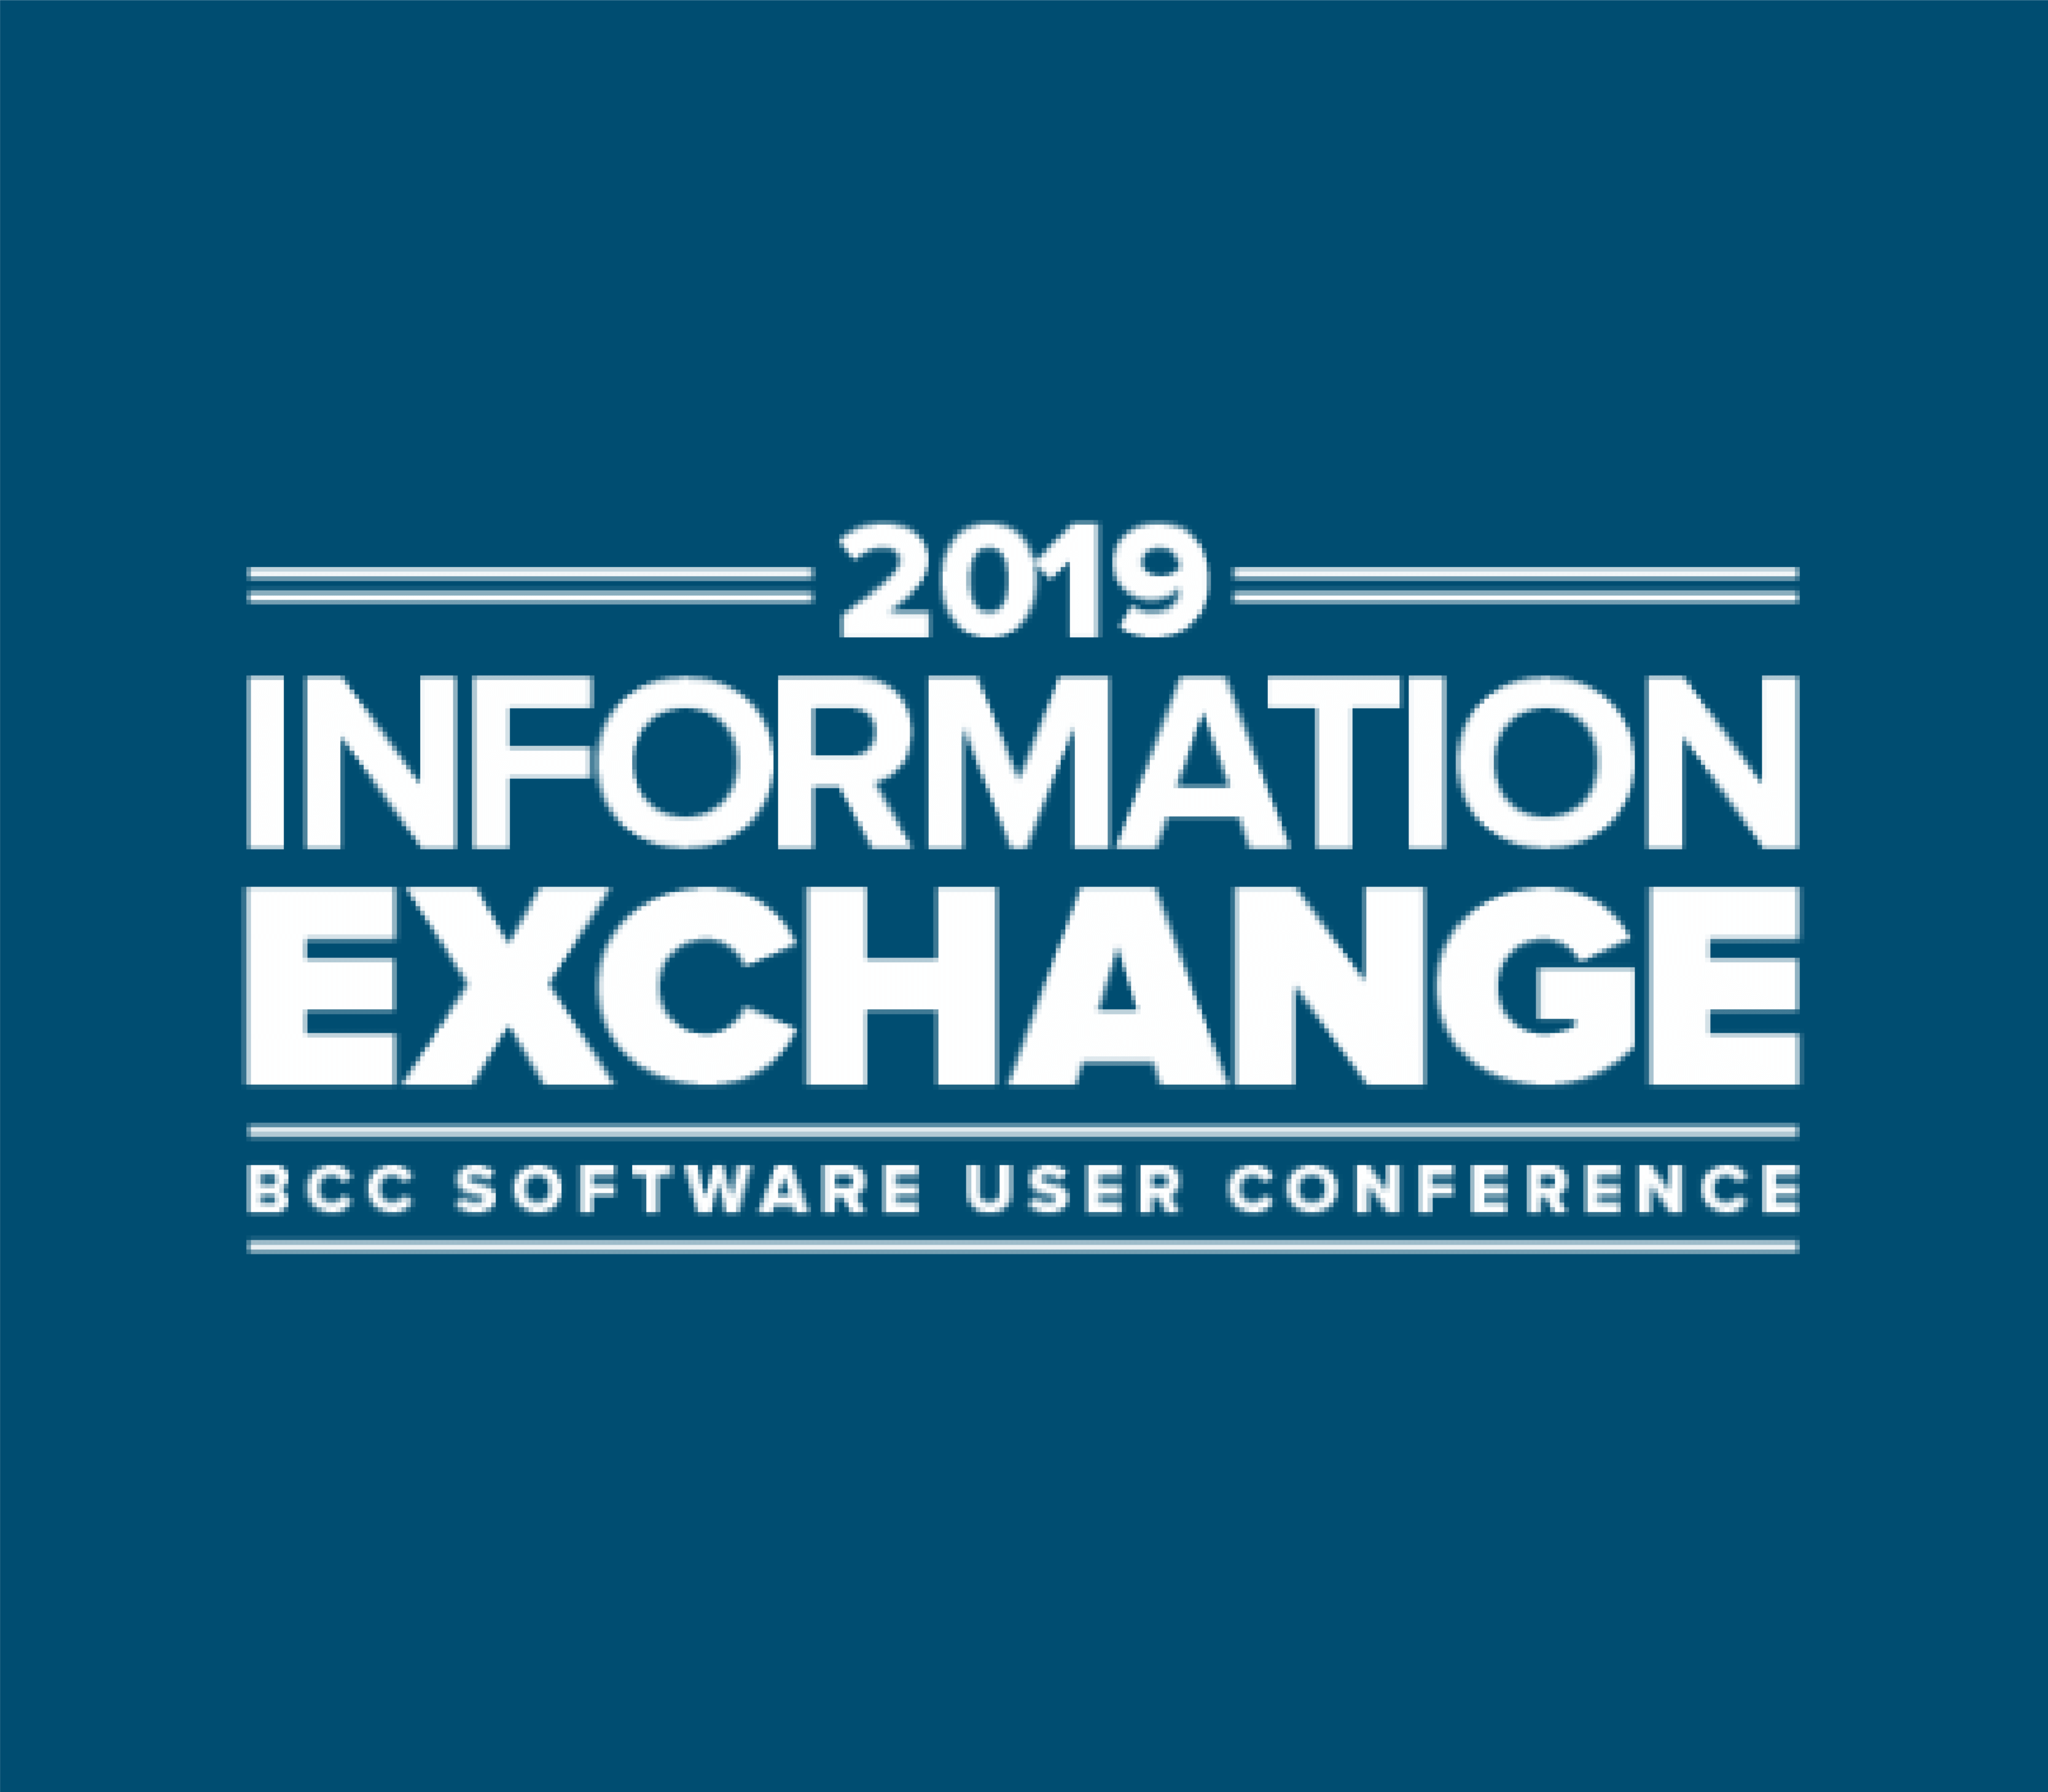 Racami to Sponsor the 2019 BCC Information Exchange User Conference